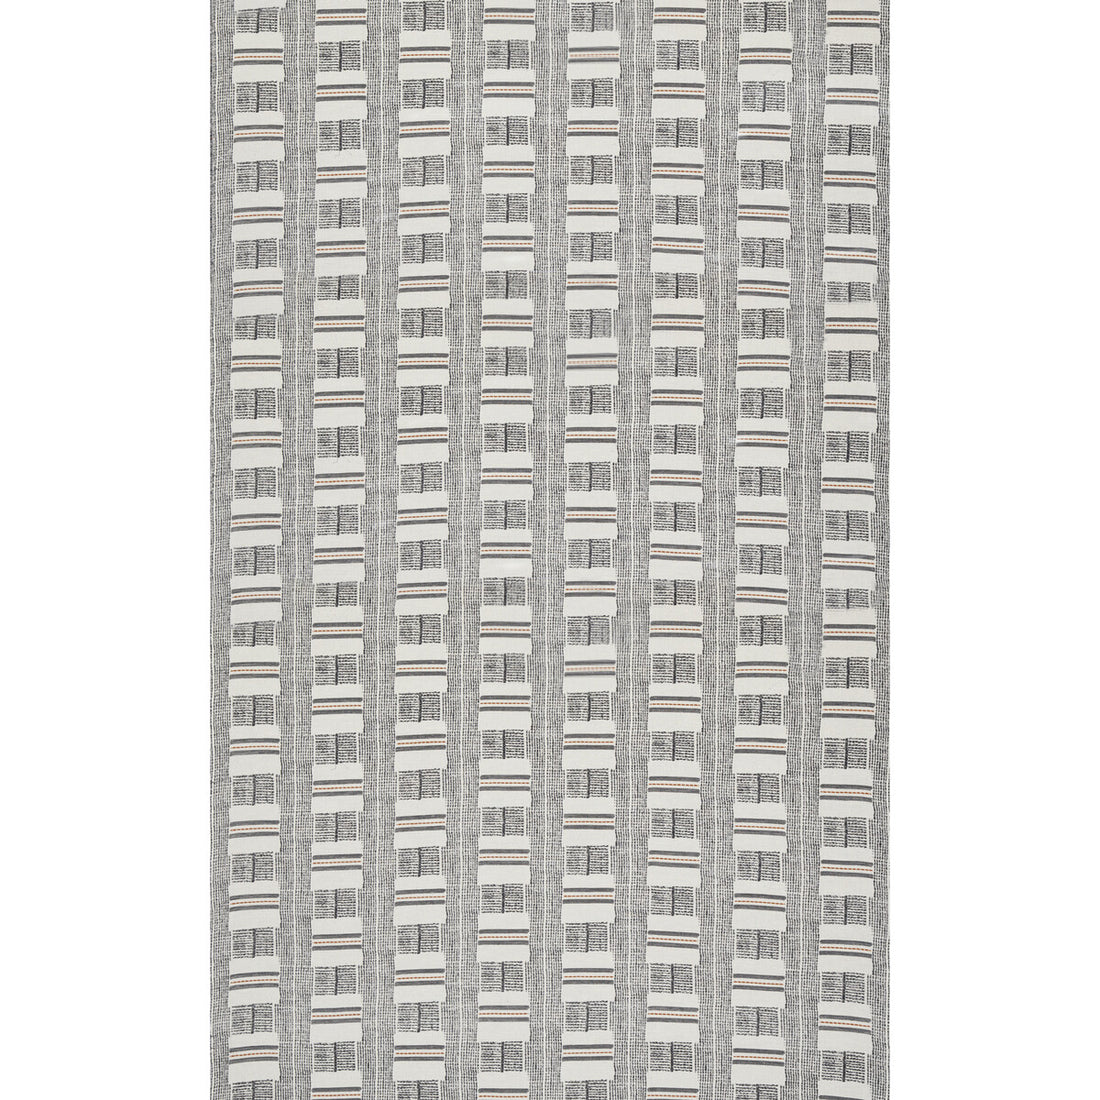 Naxos fabric in ivory/charcoal color - pattern ED85344.104.0 - by Threads in the Faraway collection